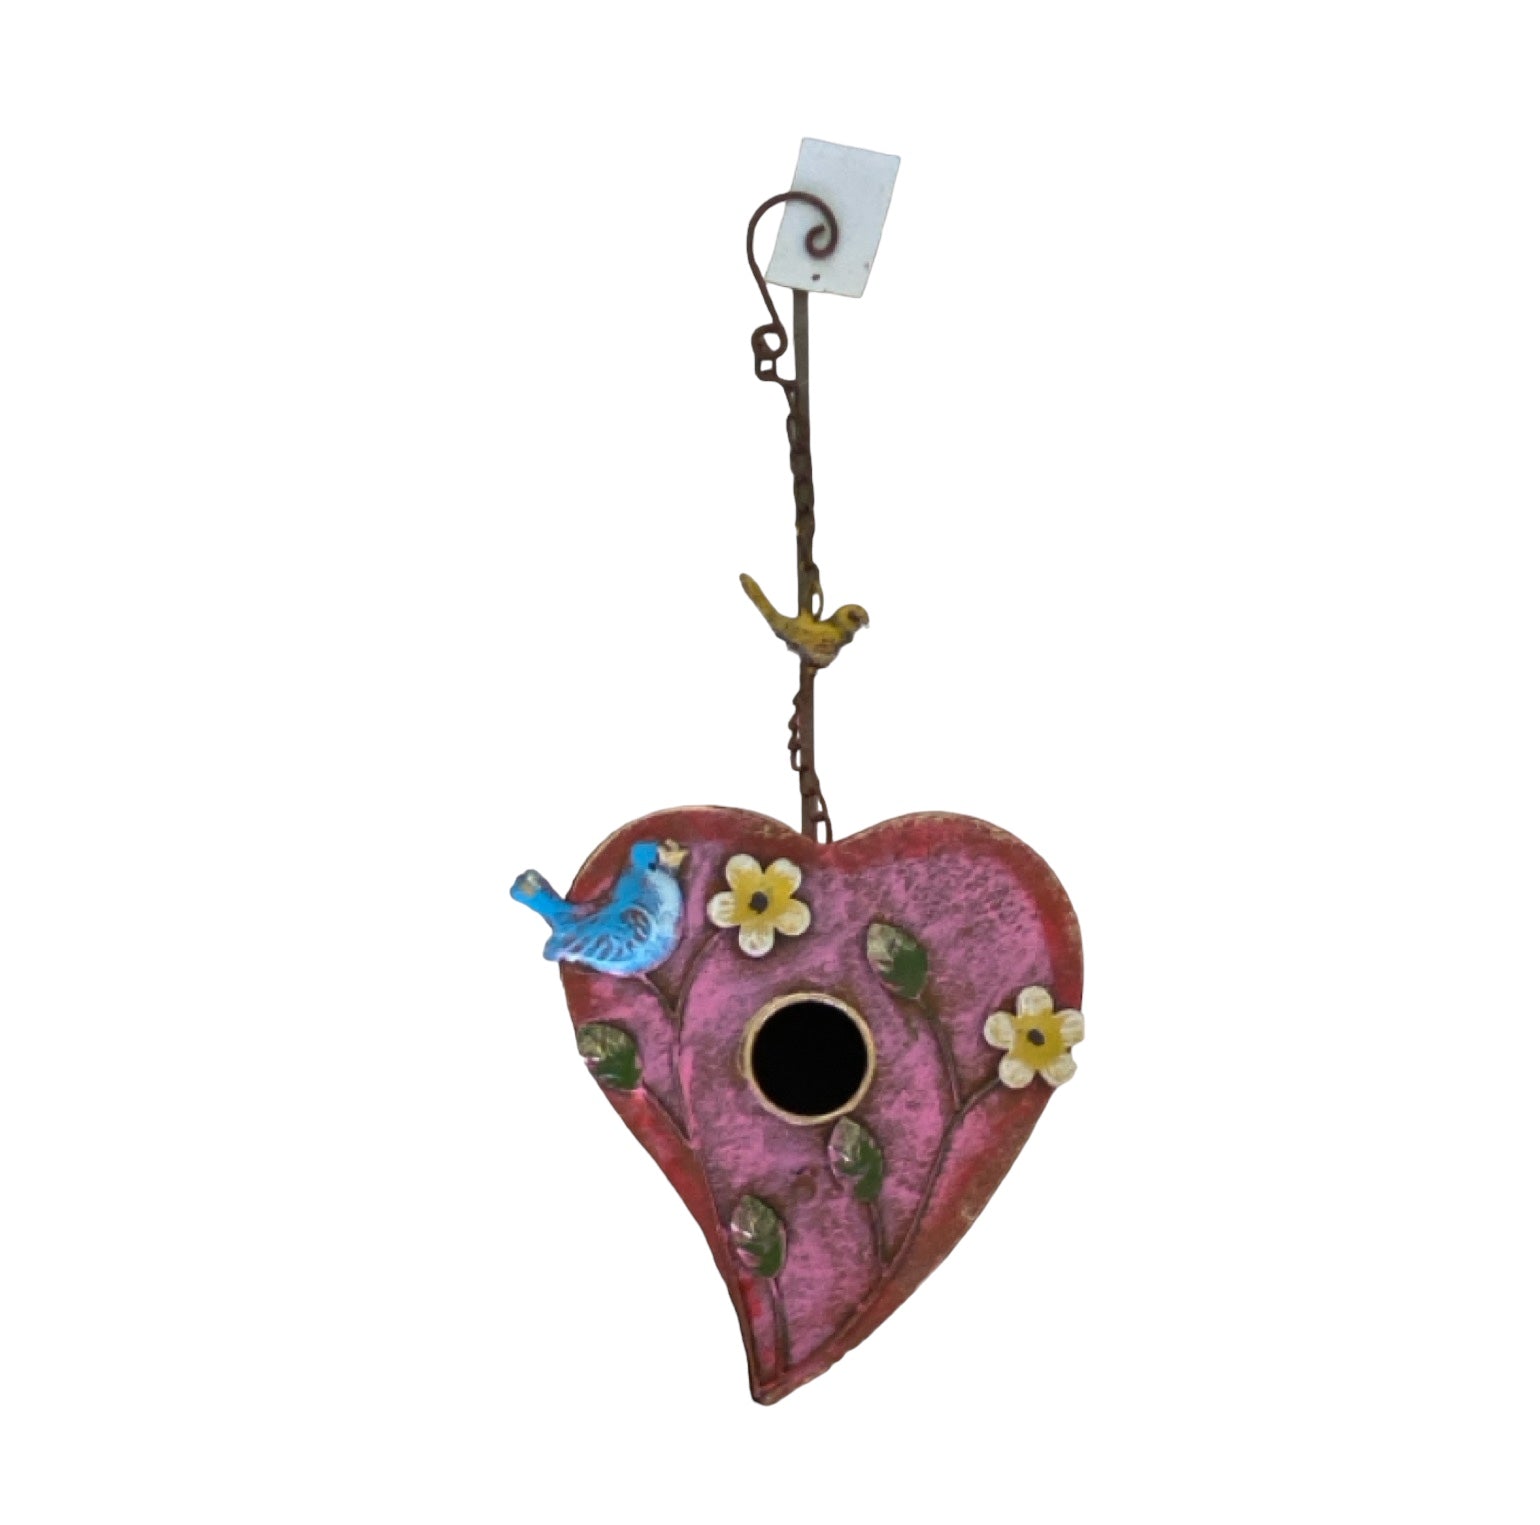 Bird House Heart Hanging Rustic - The Renmy Store Homewares & Gifts 